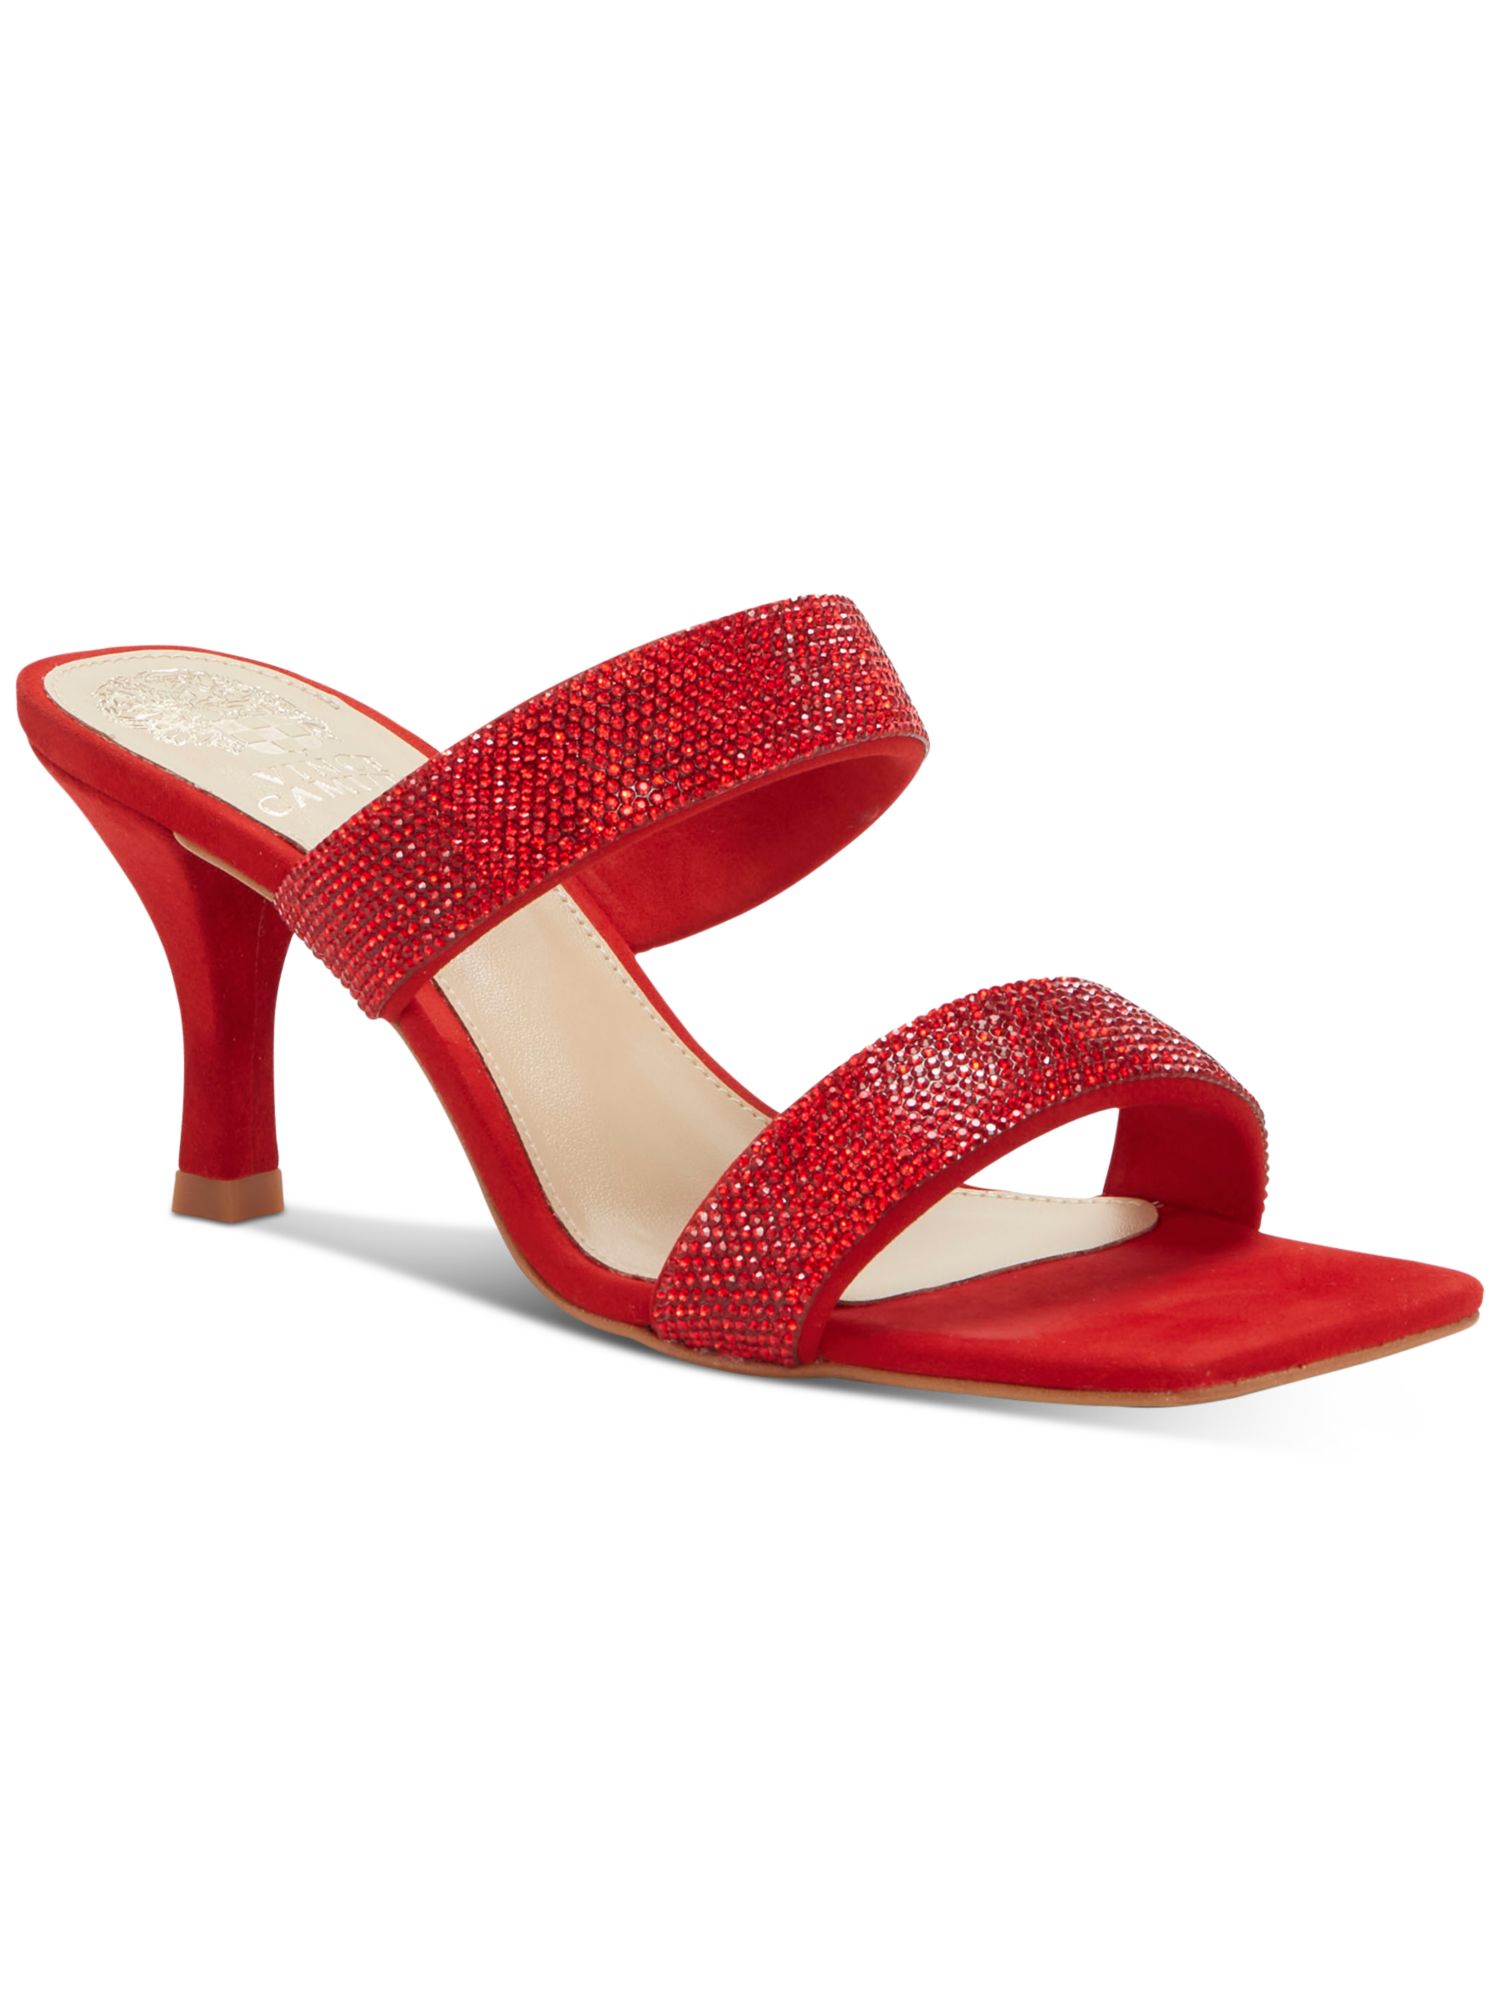 VINCE CAMUTO Womens Red Embellished Cushioned Aslee Square Toe Sculpted Heel Slip On Leather Dress Heeled Sandal 6 M